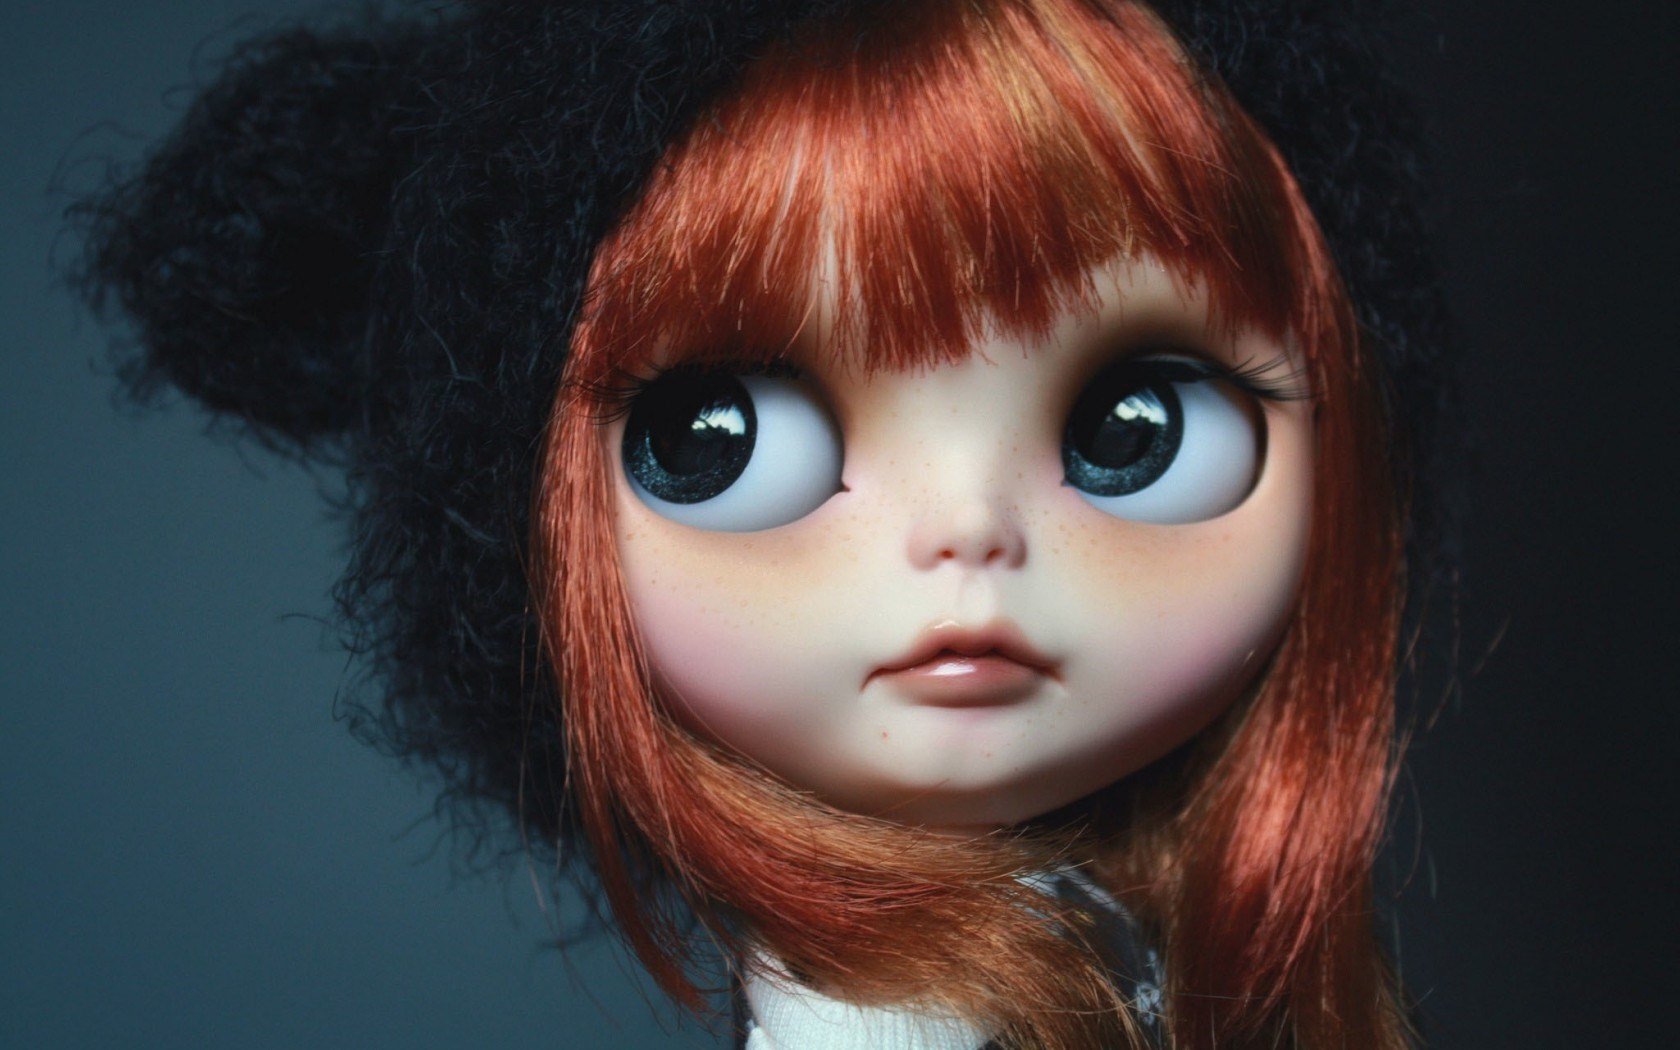 Download hd wallpapers of 895075-doll, Girl, Girls, Female, Toy, Toys, Doll...